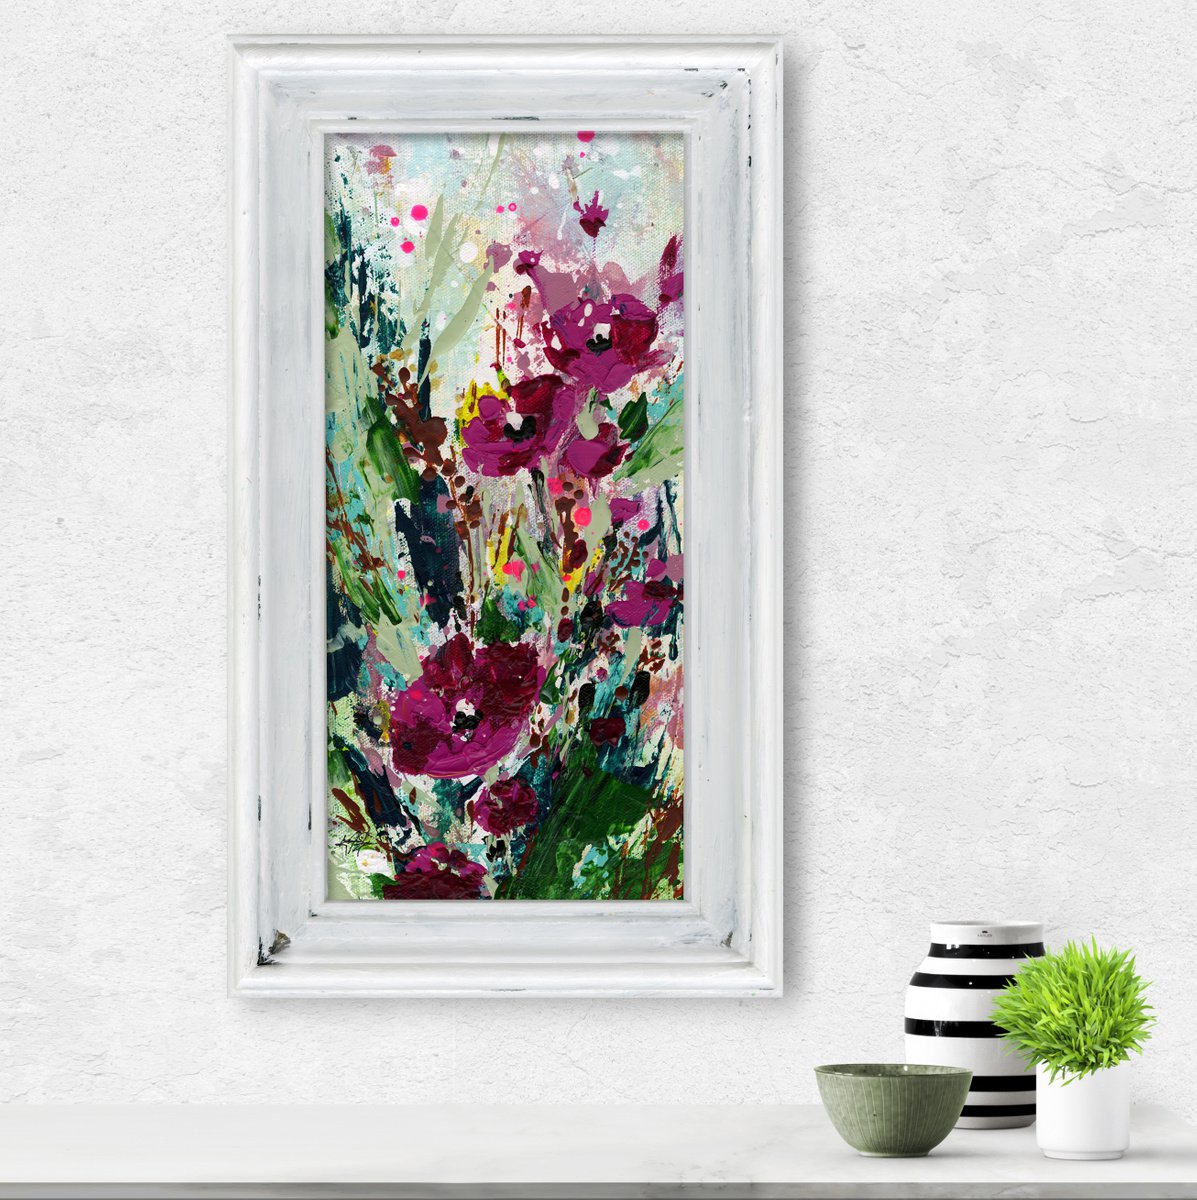 Floral Lullaby 2 - Framed Textured Floral Painting by Kathy Morton Stanion by Kathy Morton Stanion